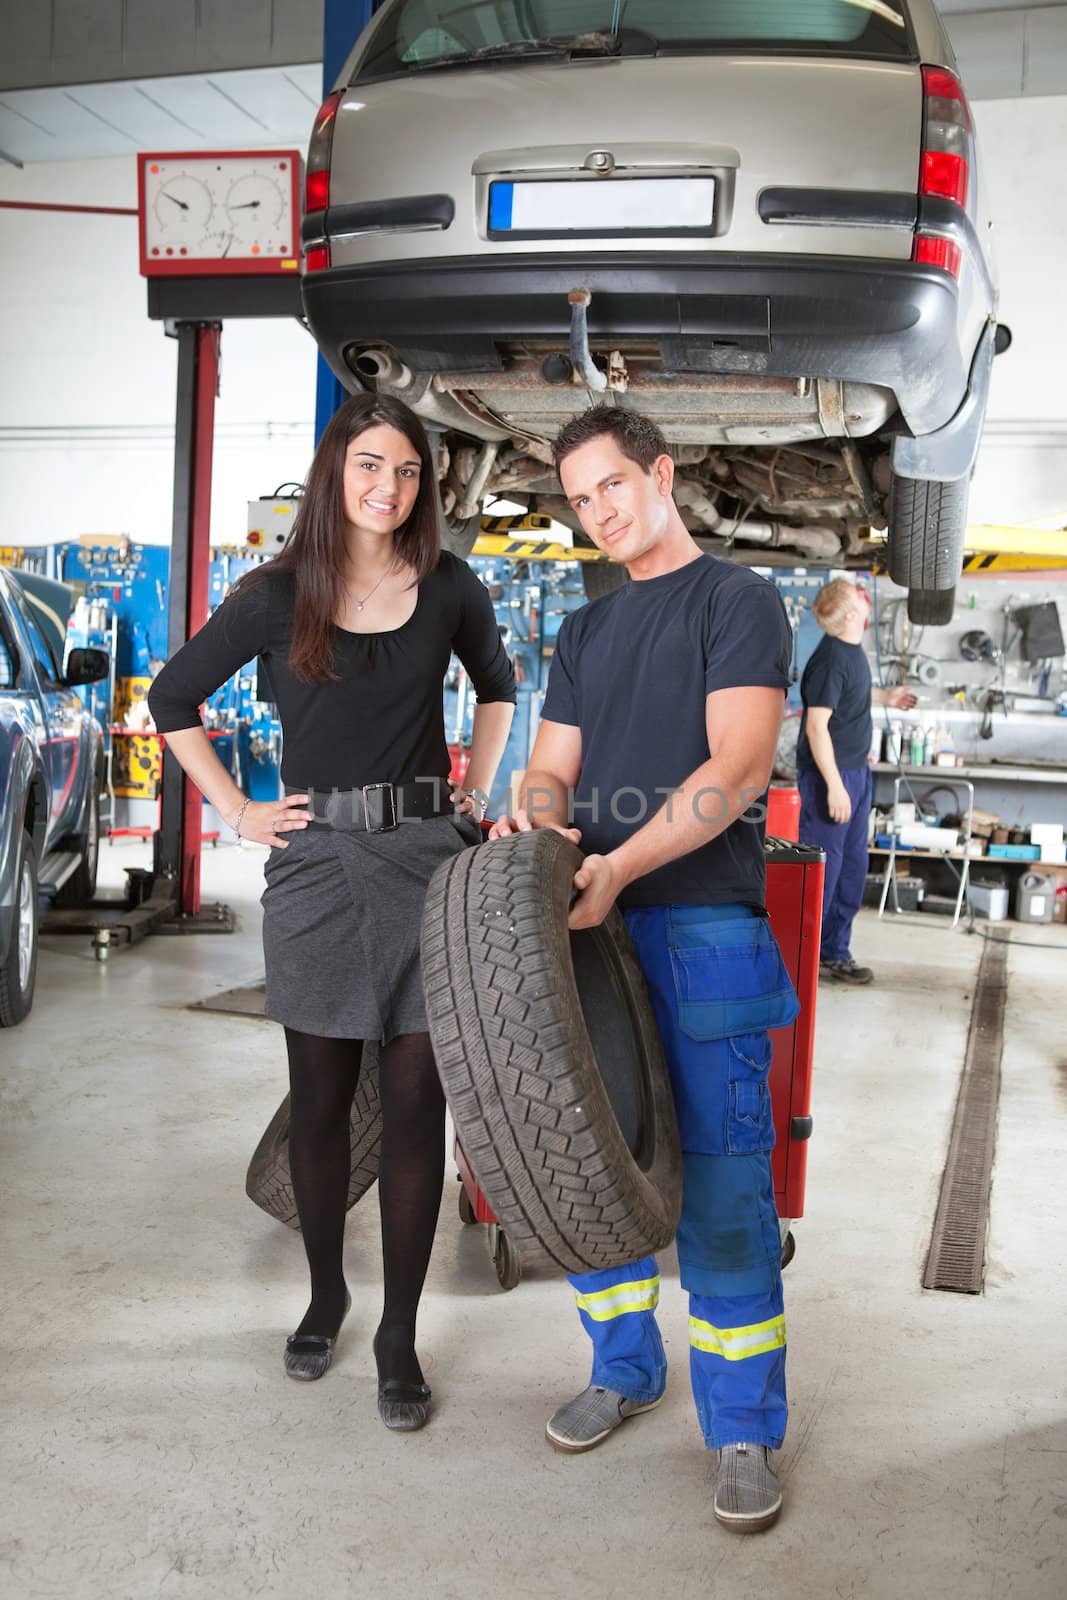 Mechanic Showing Tire to Customer by leaf